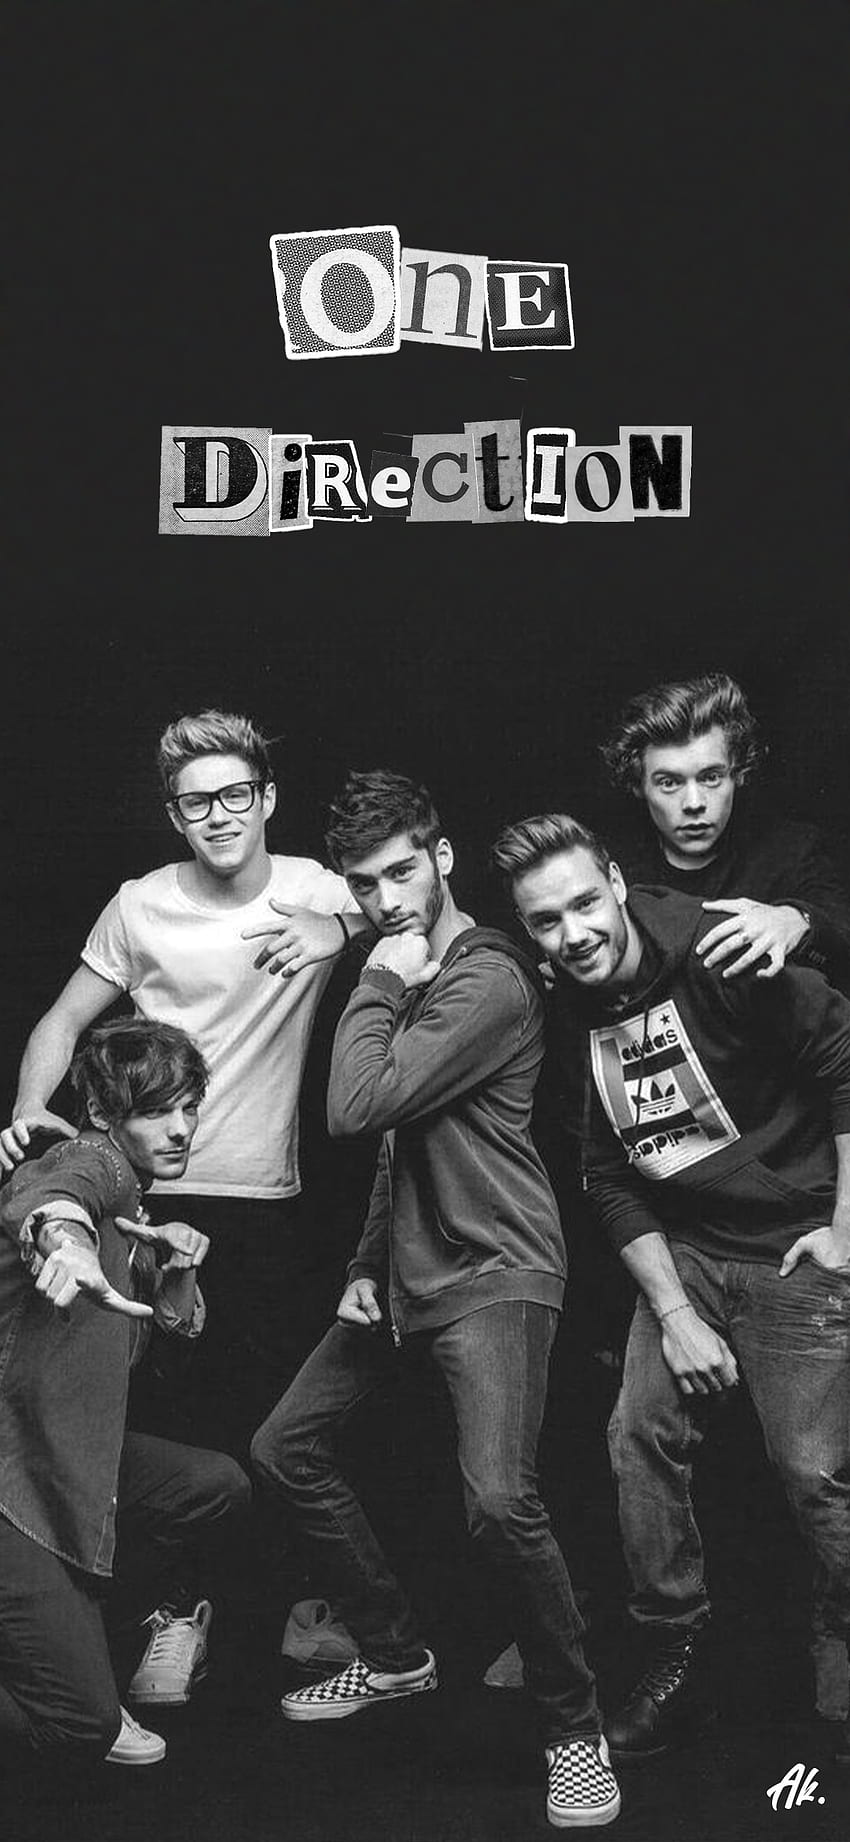 One direction, singers, graph, edit, trend, one_direction, sleeve, black, dark, band HD phone wallpaper